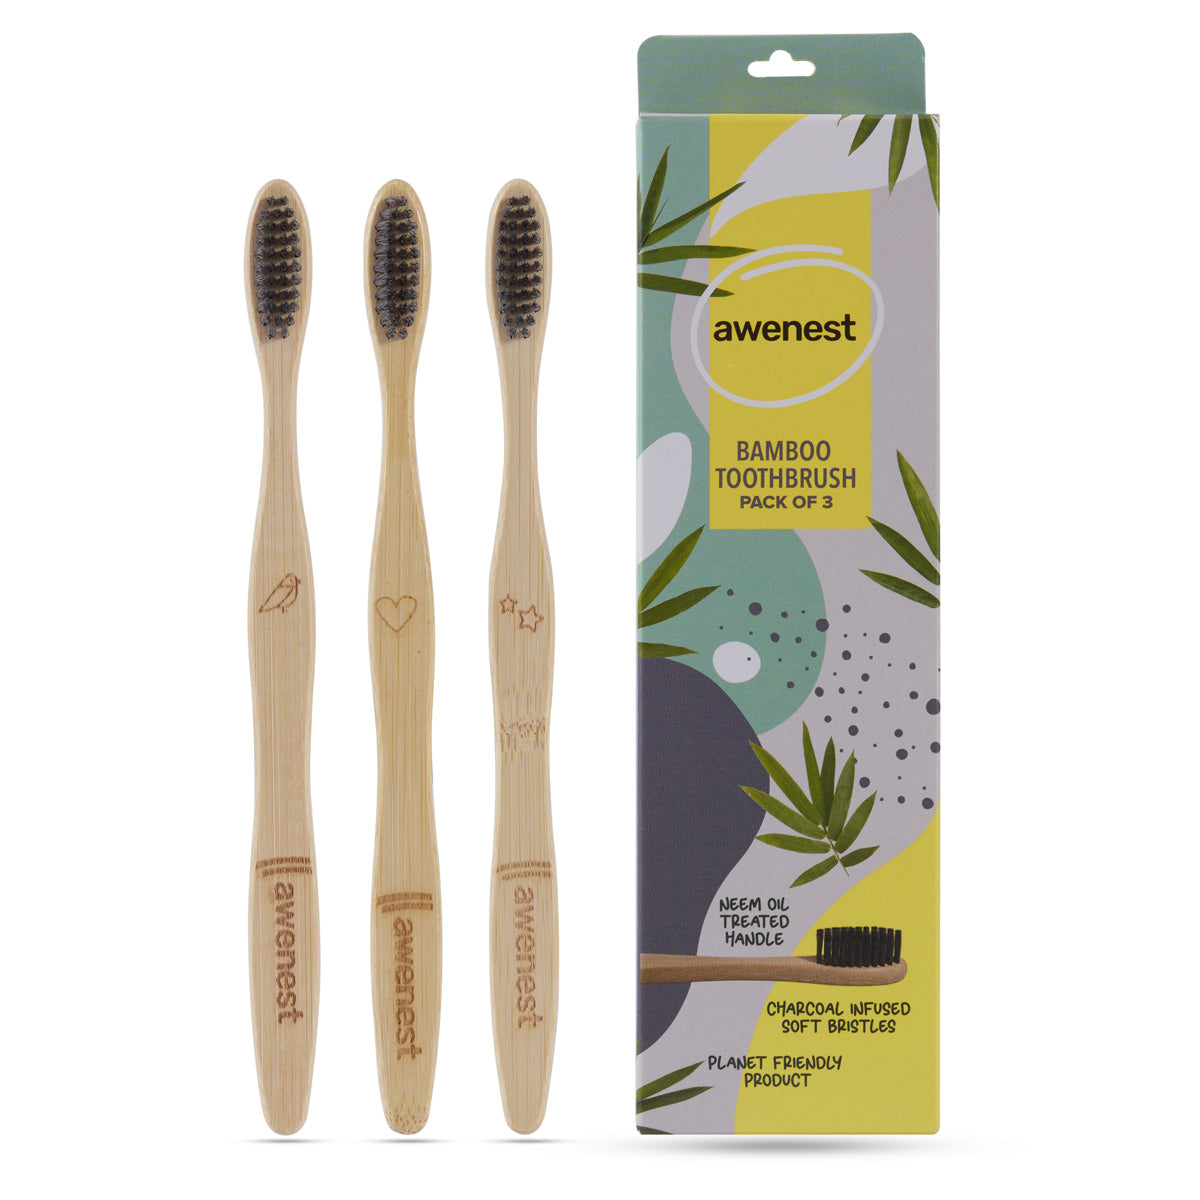 Charcoal coated bristles, neem oil coated bamboo toothbrush - pack of 3